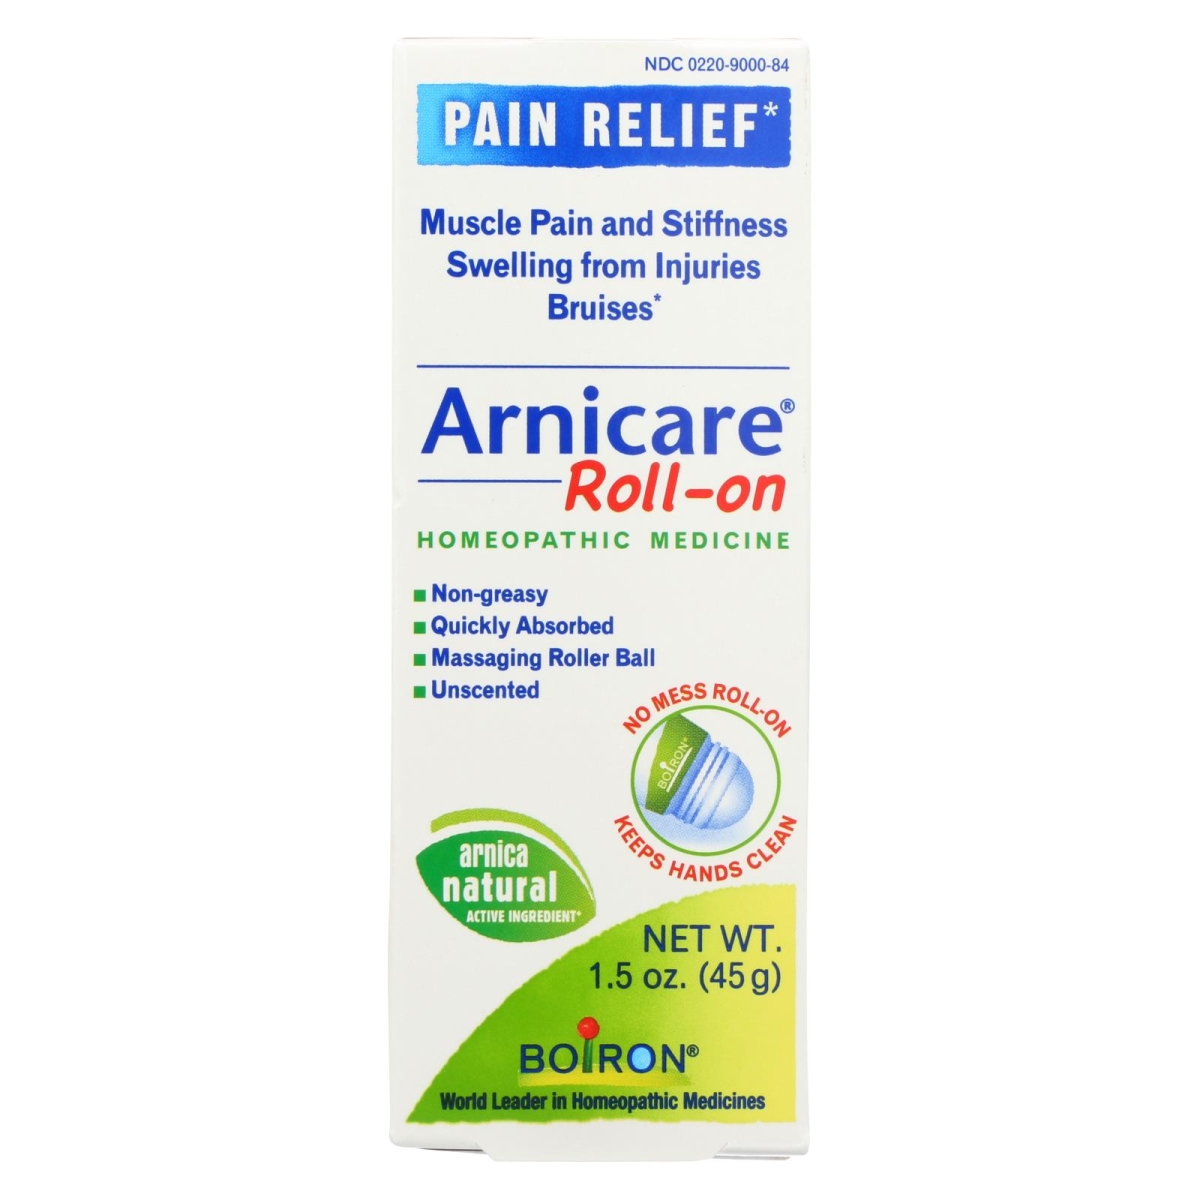 2314235 1.5 Oz Arnicare Roll-on Pain Relief